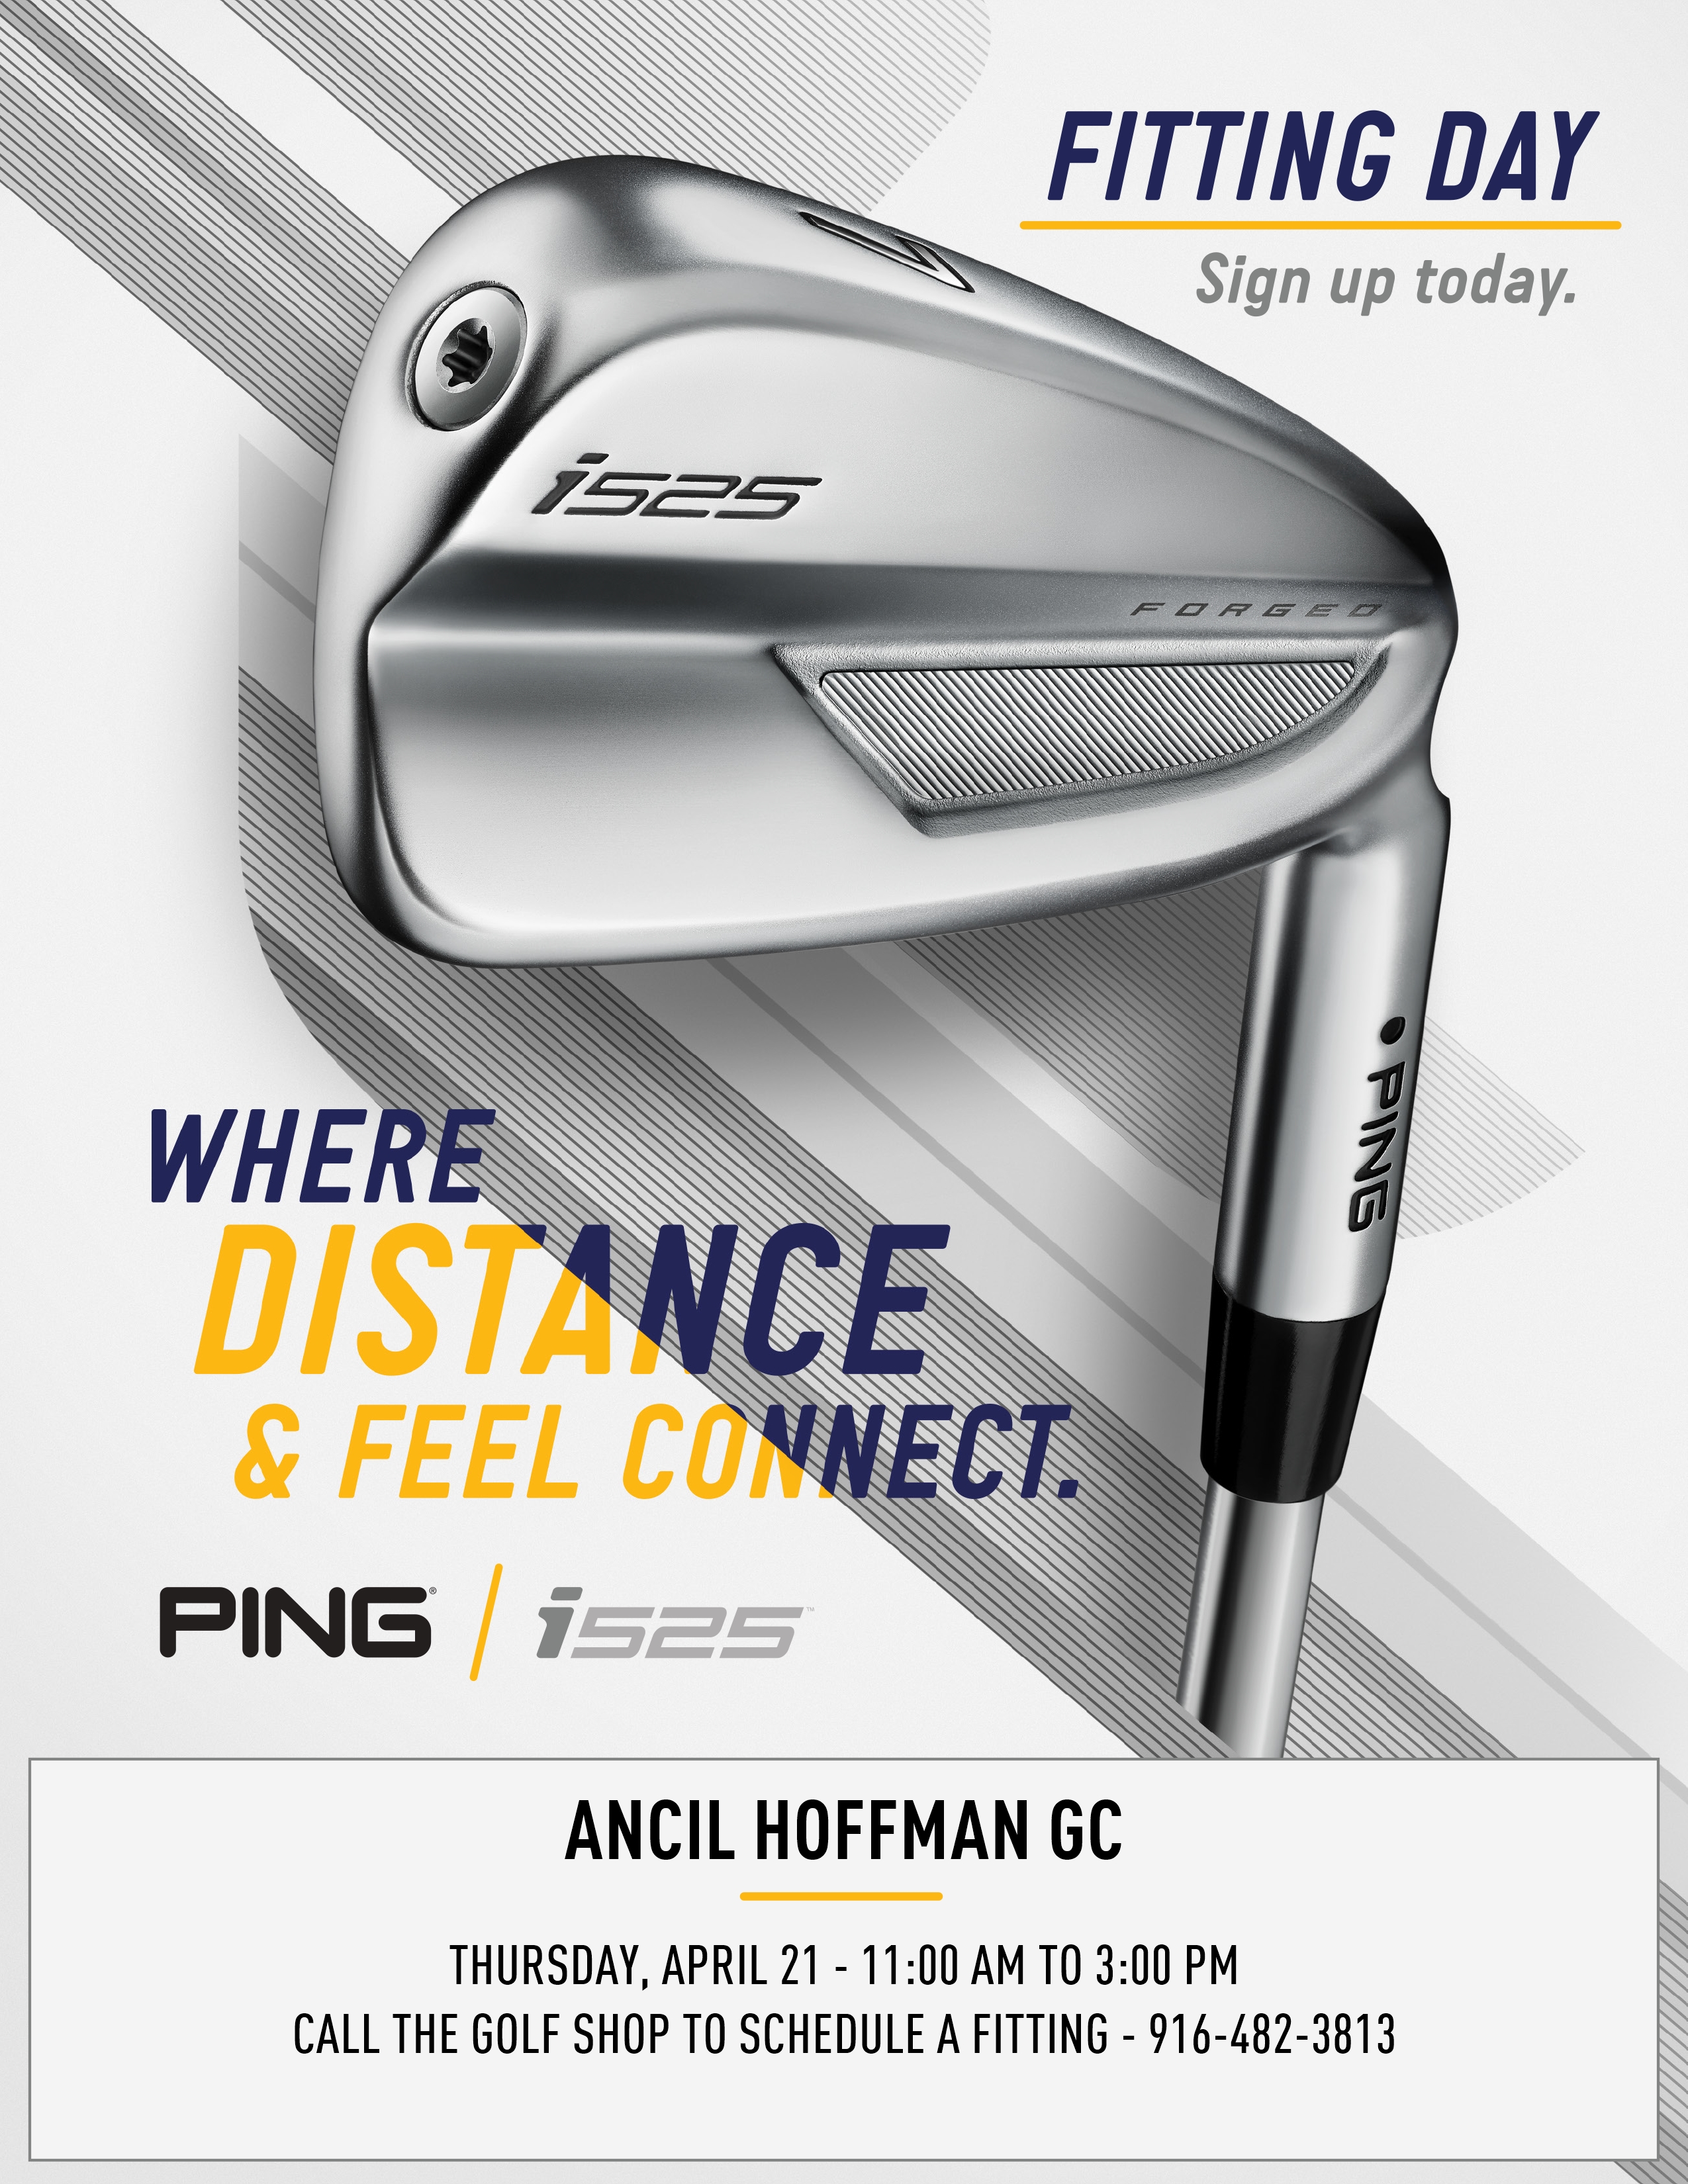 PING Fitting Day Flyer Ancil Hoffman GC 4